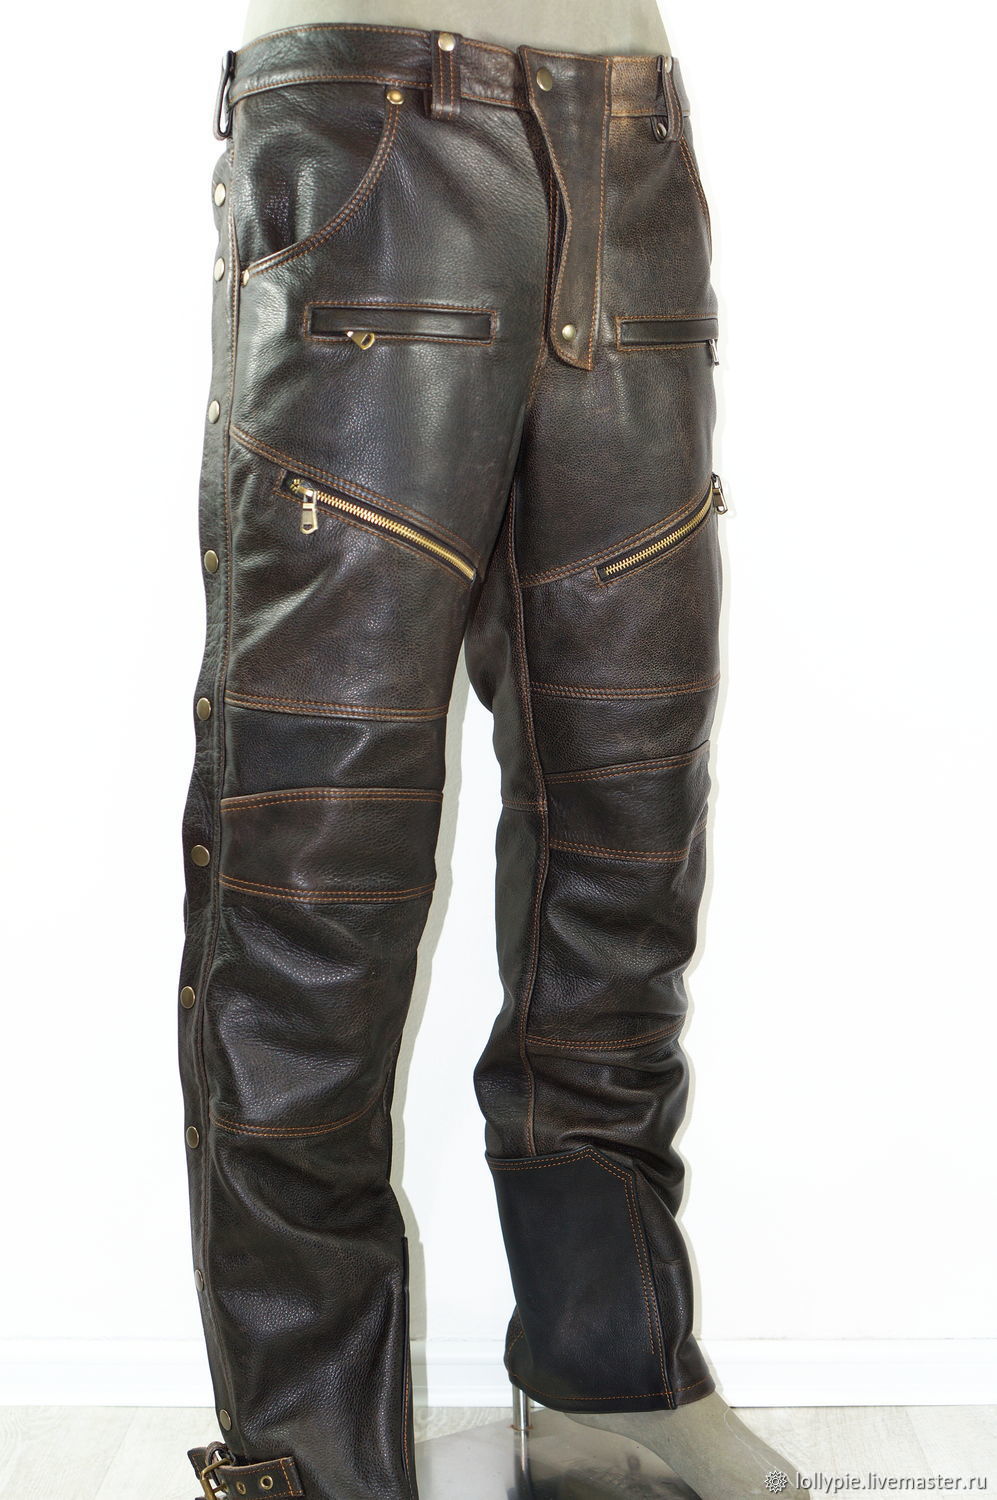 Men's Distressed Brown Leather pant Jeans style Motorcycle Biker Style –  SUPER THROTTLE